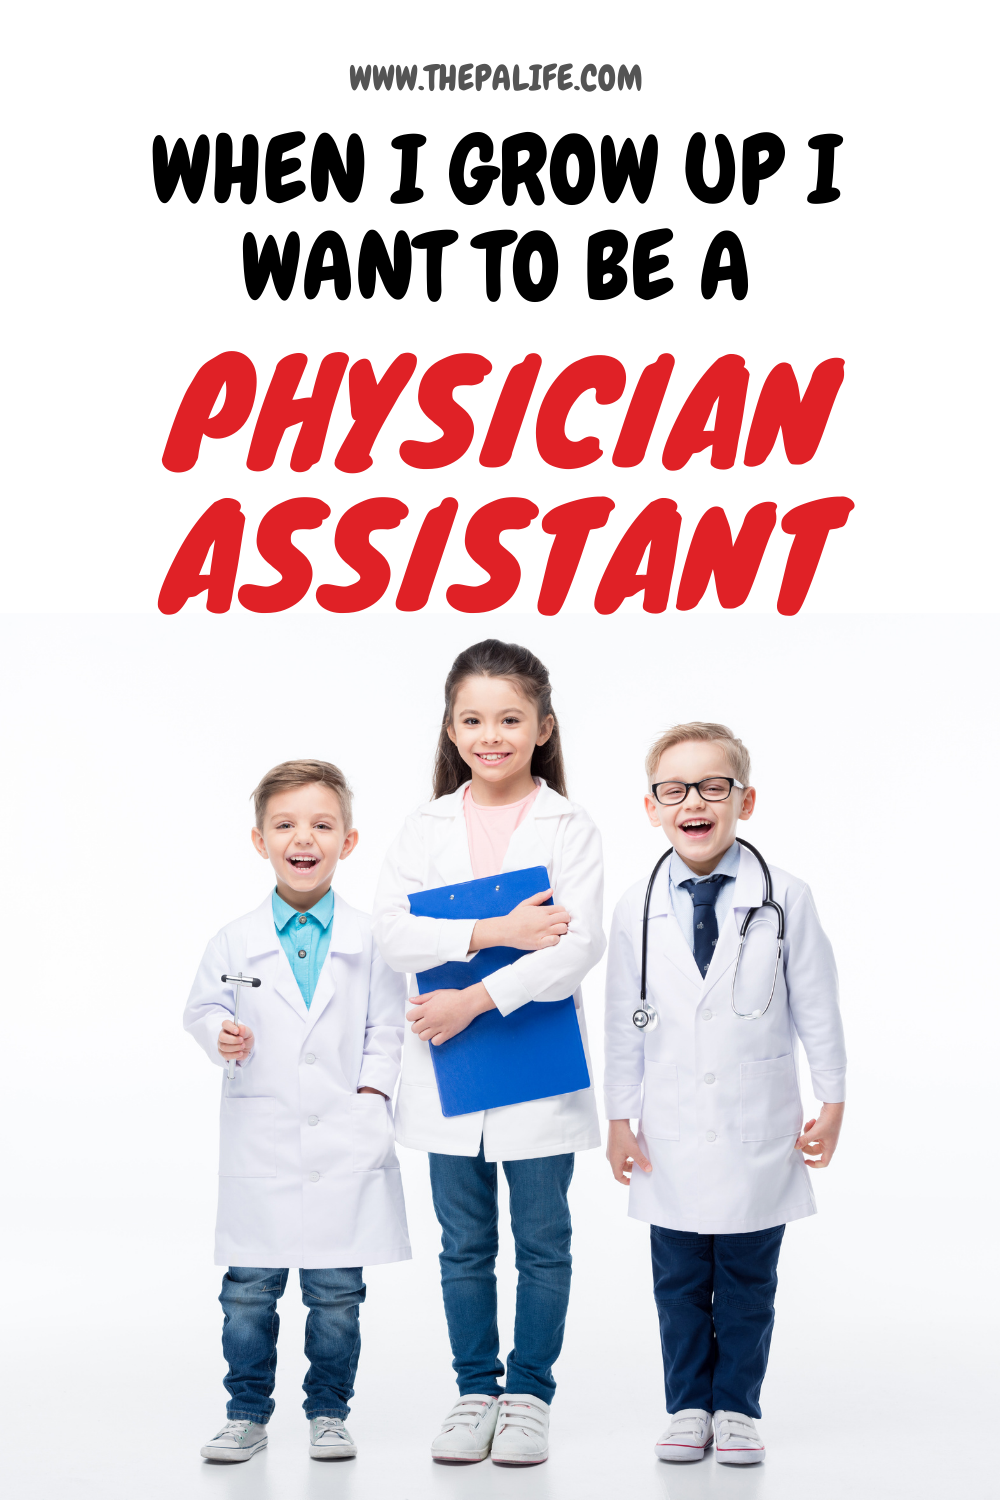 Why Do You Want to be a Physician Assistant? The Physician Assistant Life